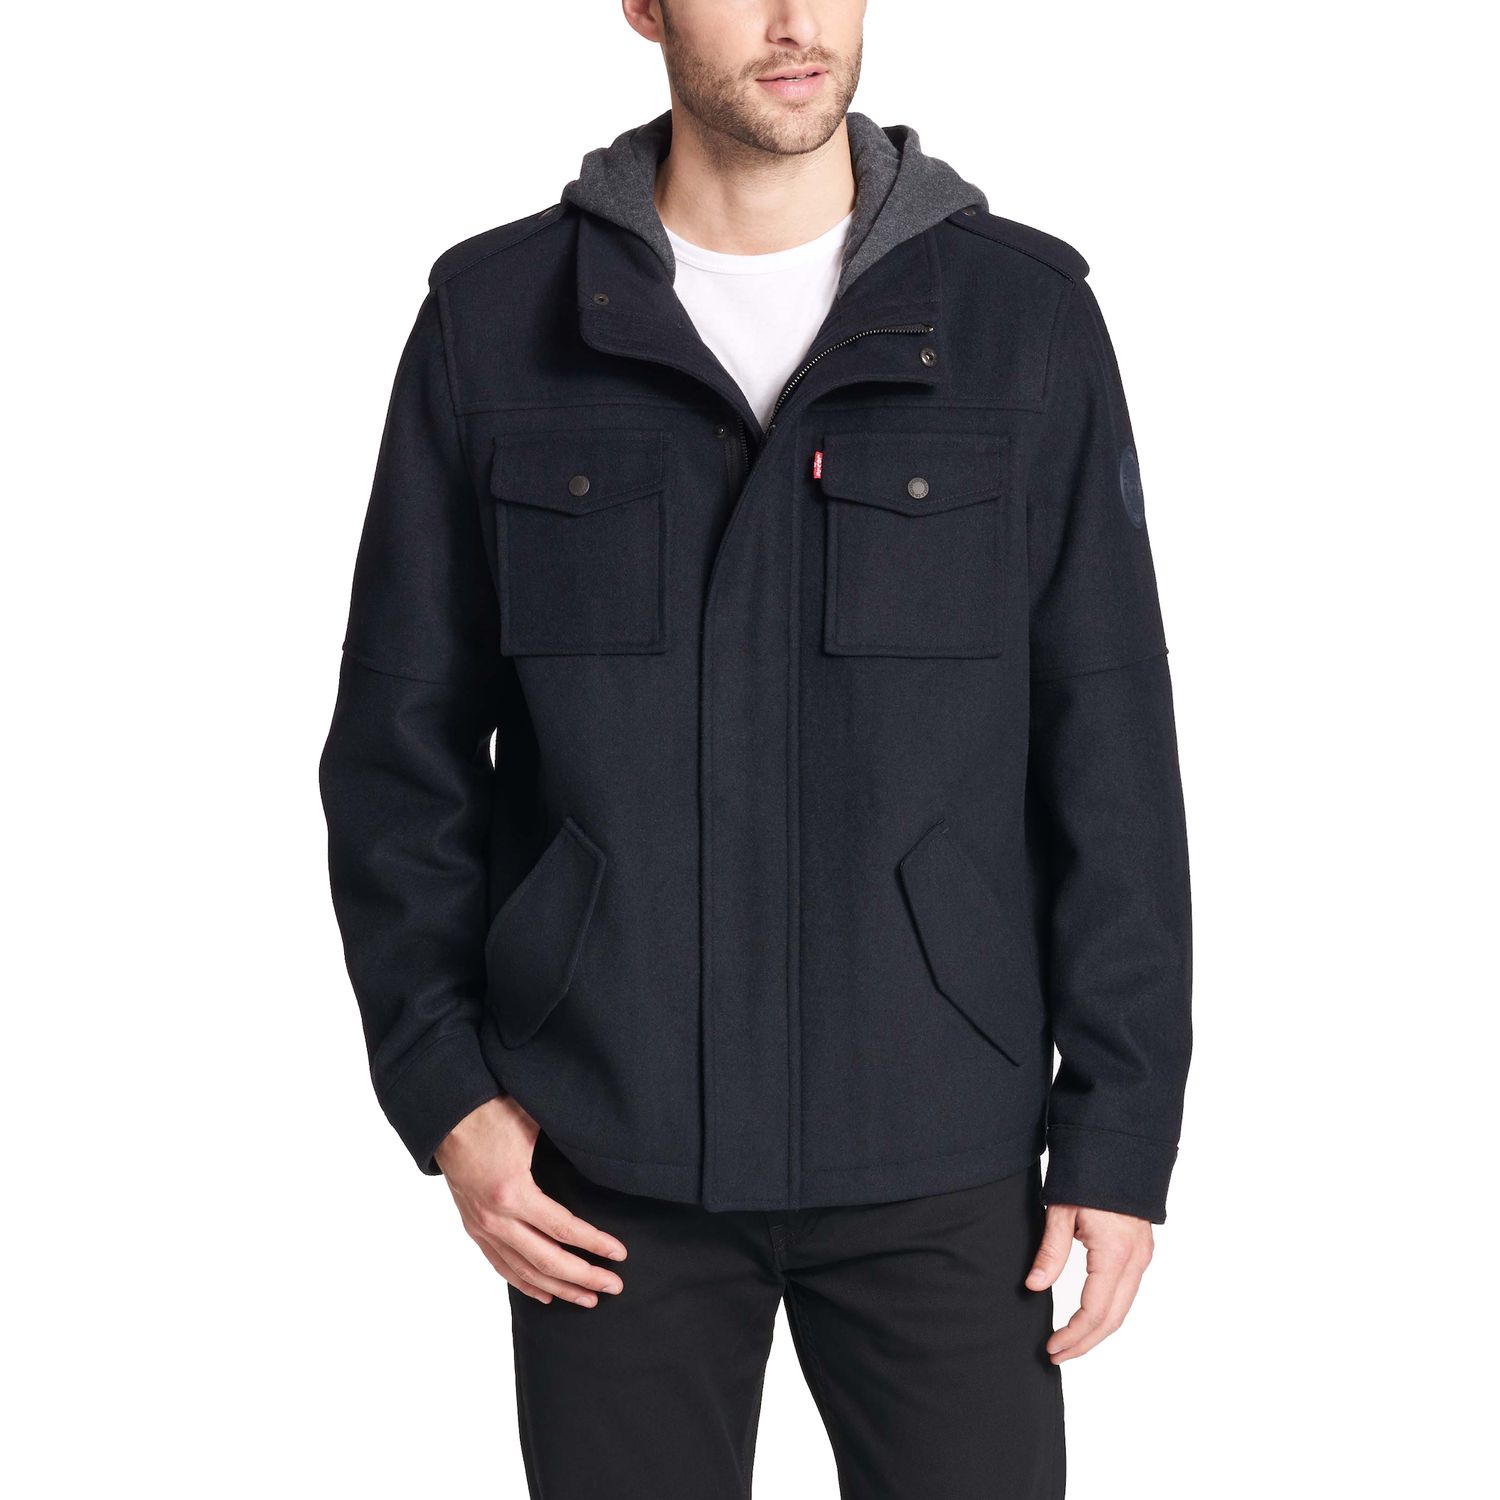 levi's men's wool blend military jacket with hood